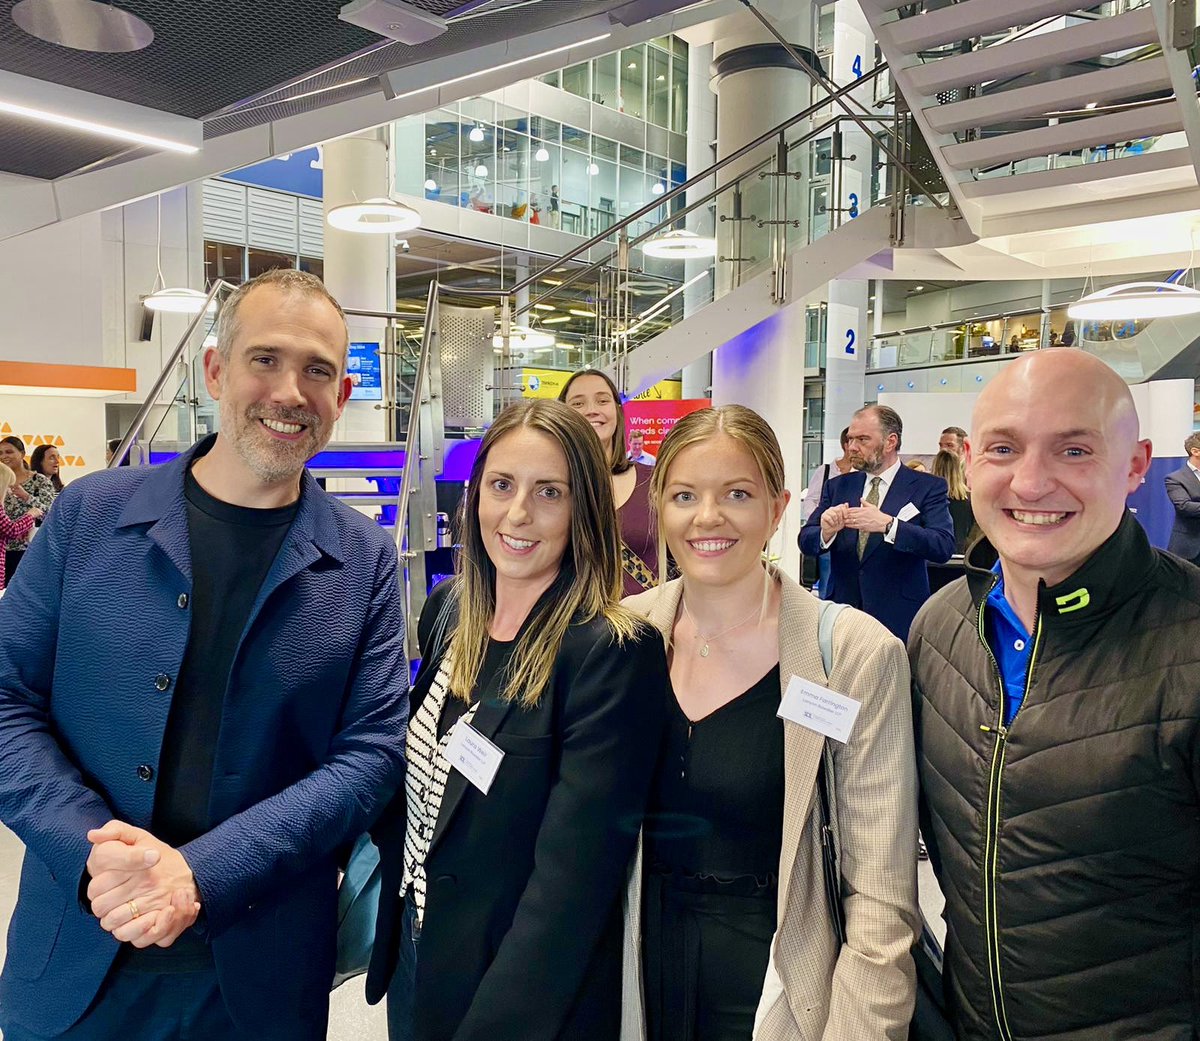 A brilliant day at #SCILed2024 with the team. Great speakers and good to connect with our CN peers and to meet @xandvt! Spot the photobomb from our head of department! #scilorg